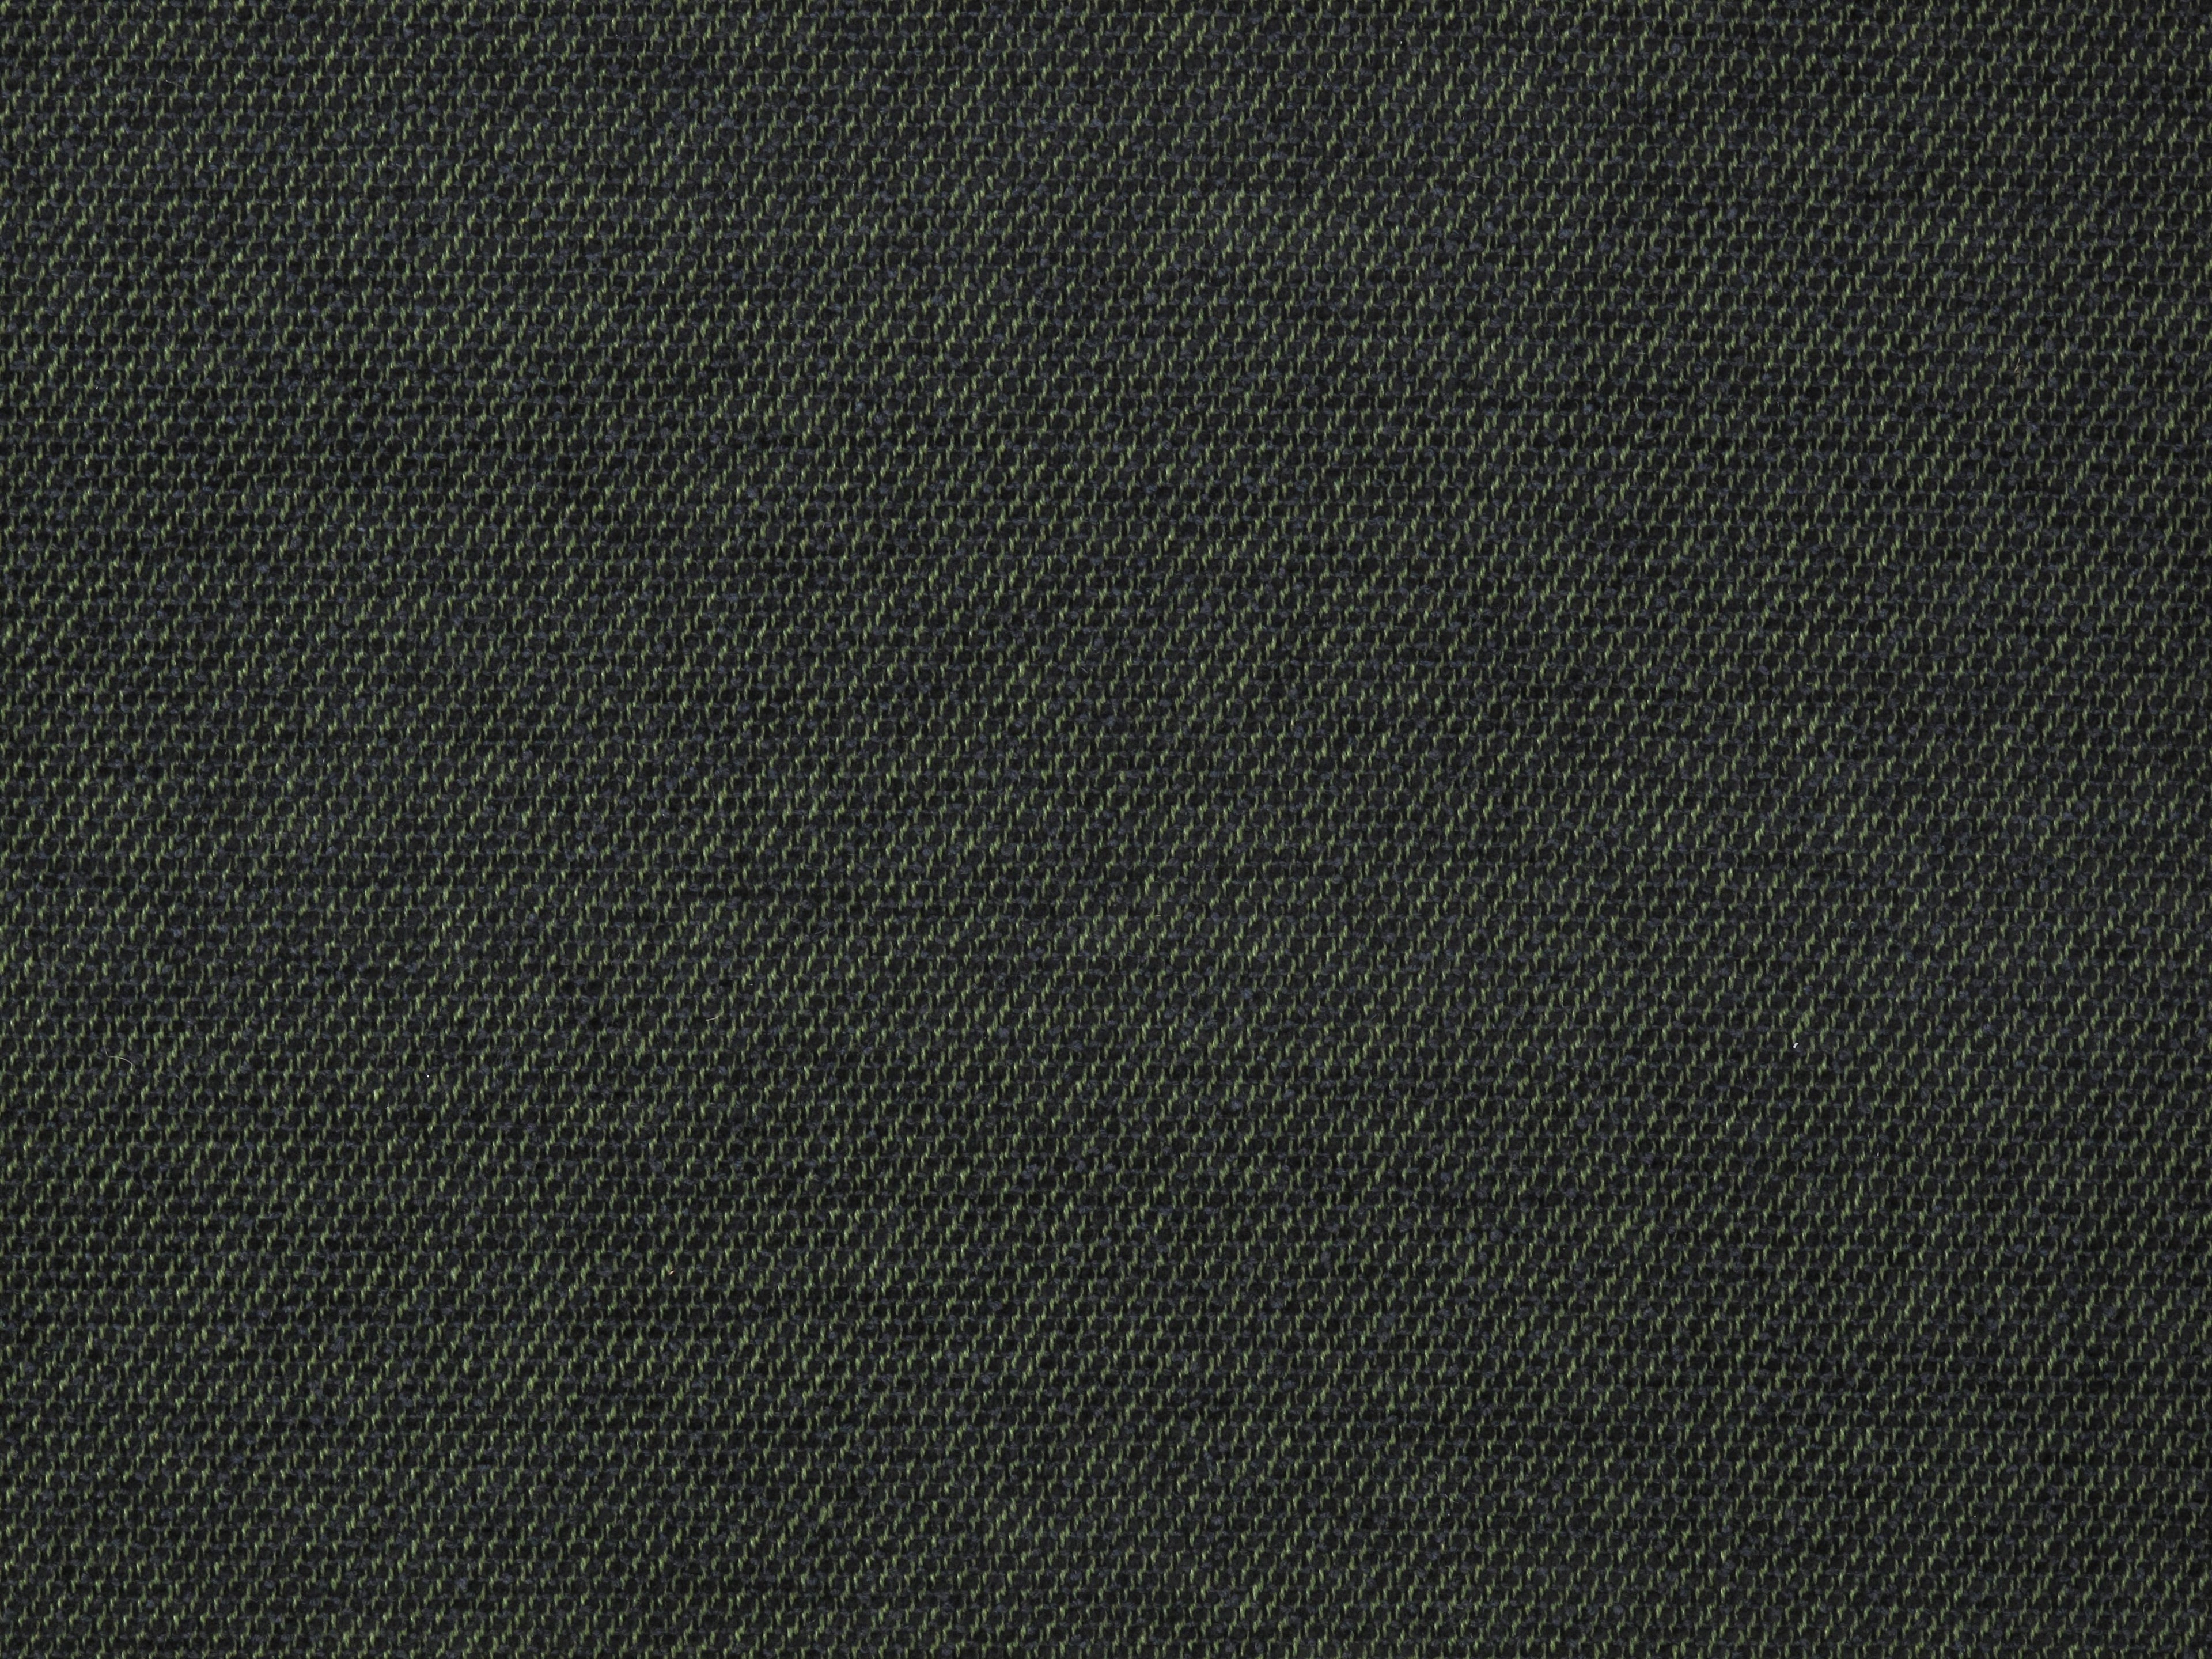 Bahia Twill fabric in green black color - pattern number LW 04201913 - by Scalamandre in the Old World Weavers collection